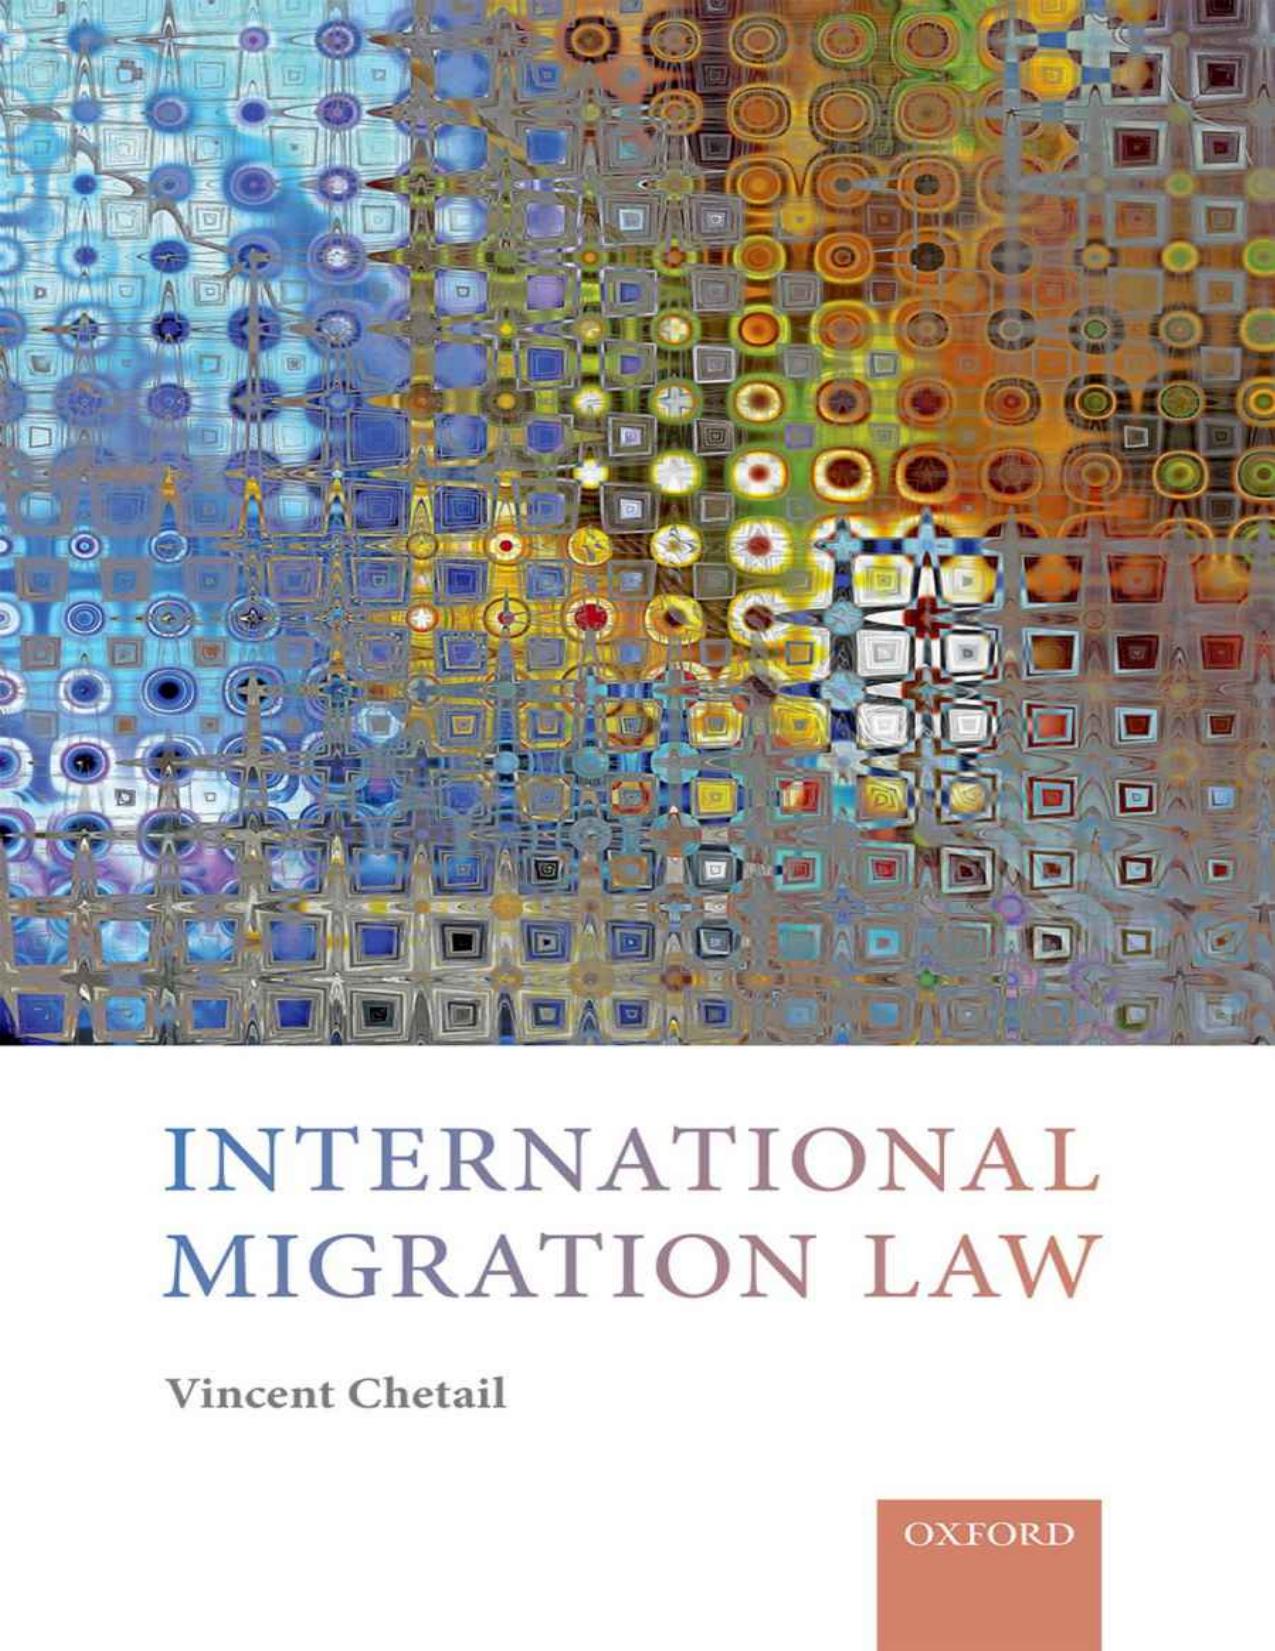 International Migration Law 1st Edition by Vincent Chetail